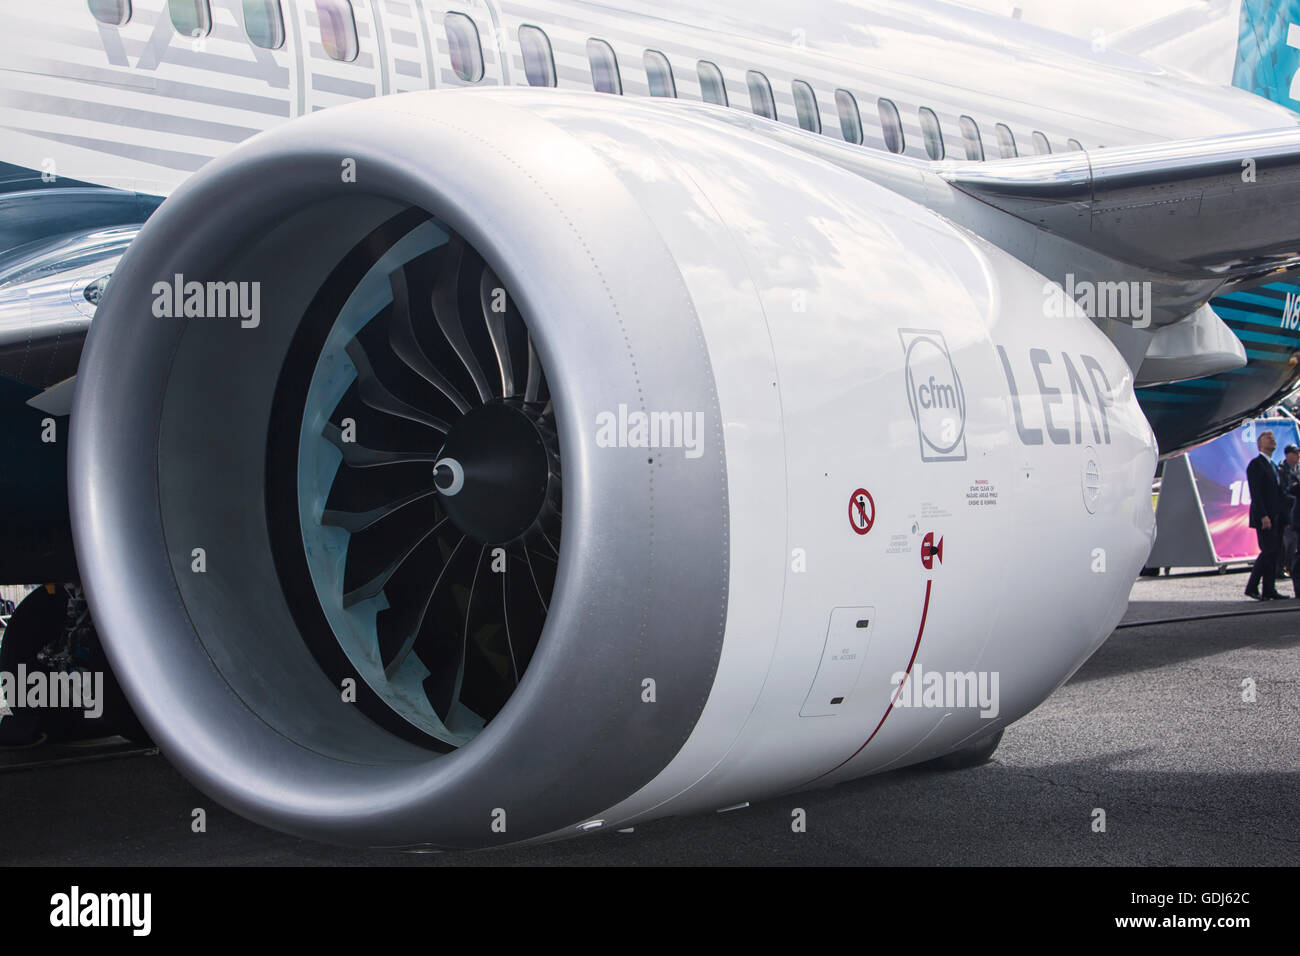 The new Boeing 737 Max and CFM International LEAP engine the Farnborough Airshow 2016 Stock Photo